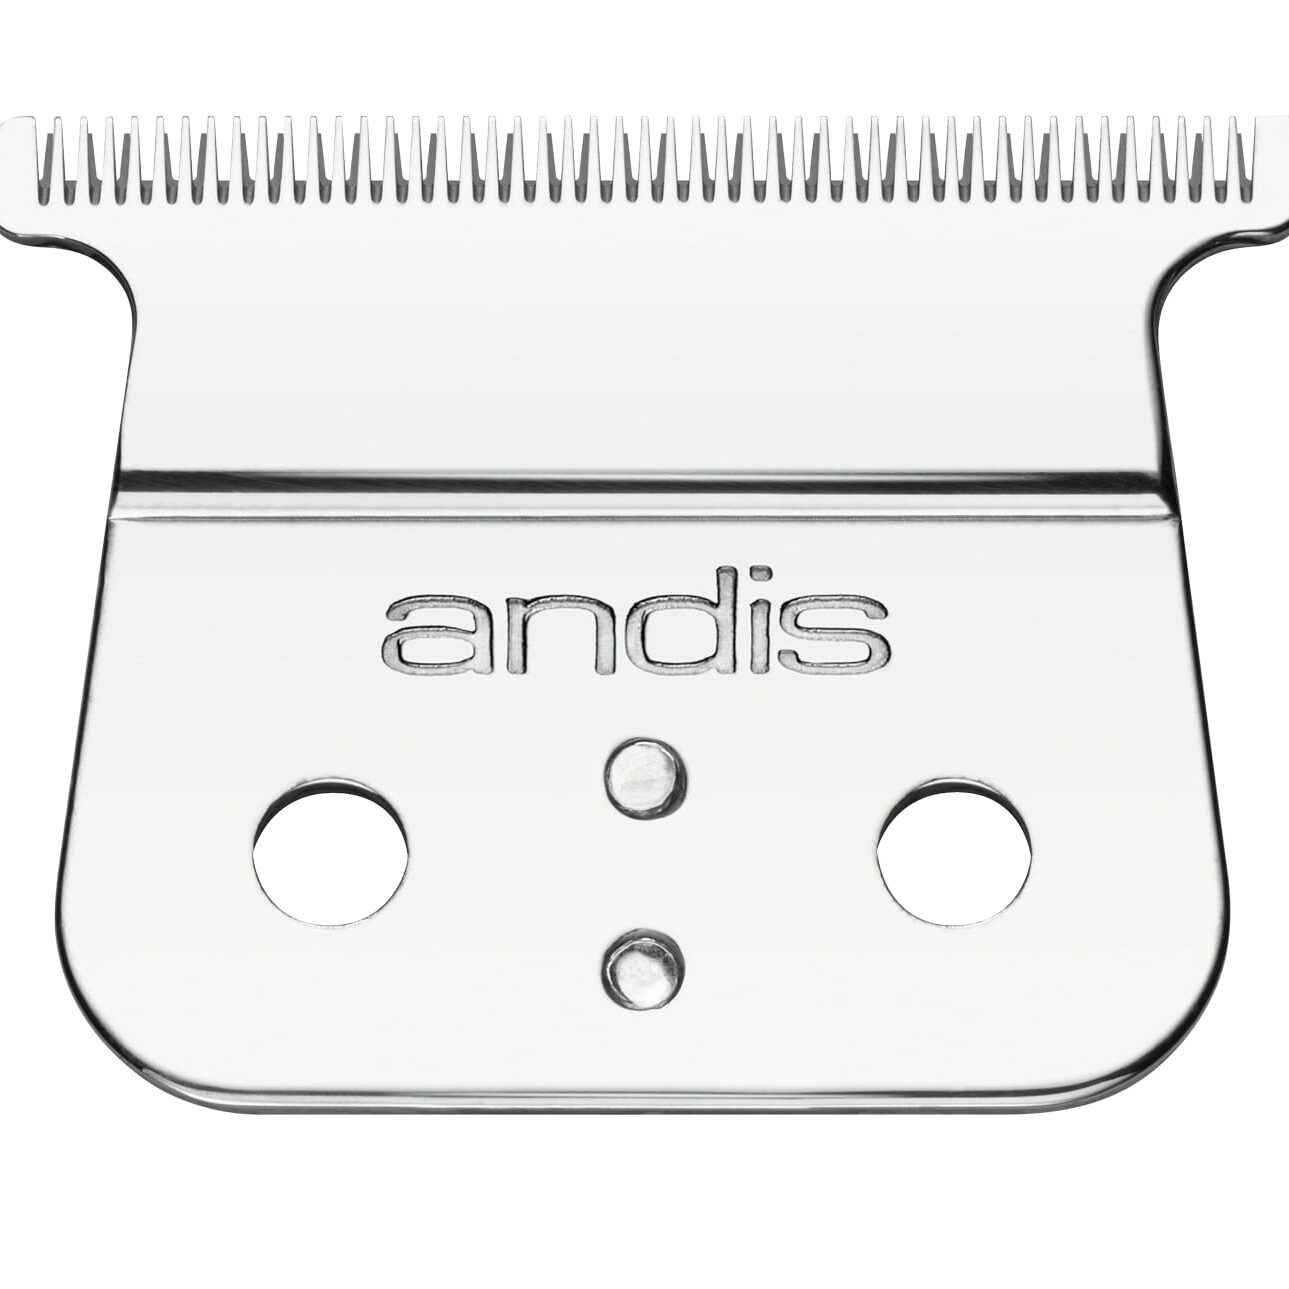 A close up of the andis blade